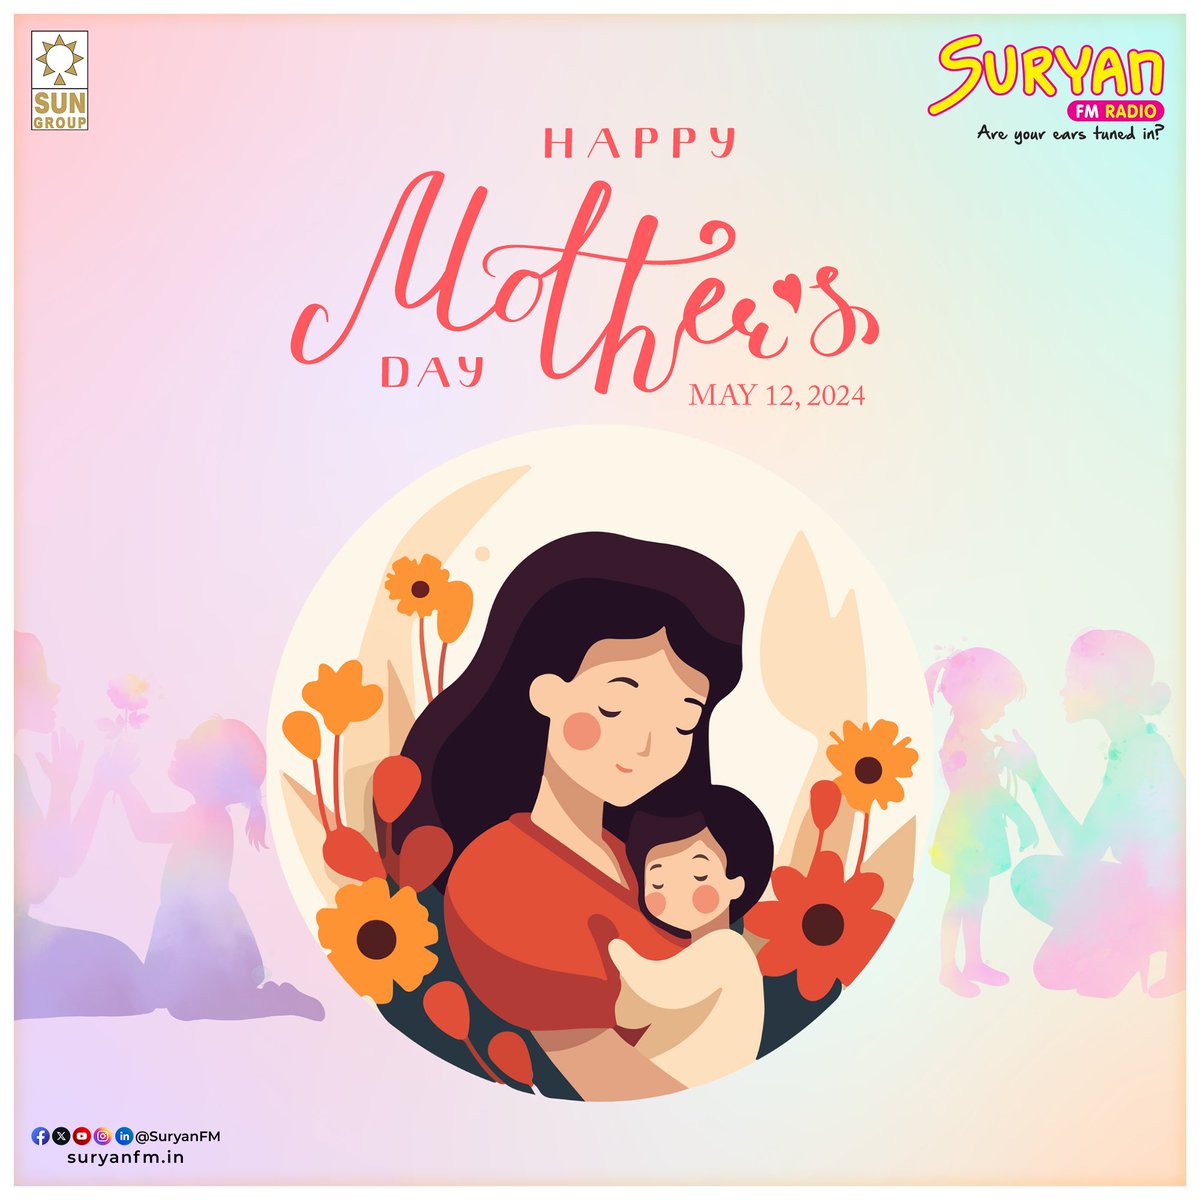 Happy Mother's Day All 💞

#MothersDay #MothersDay2024 #SuryanFM